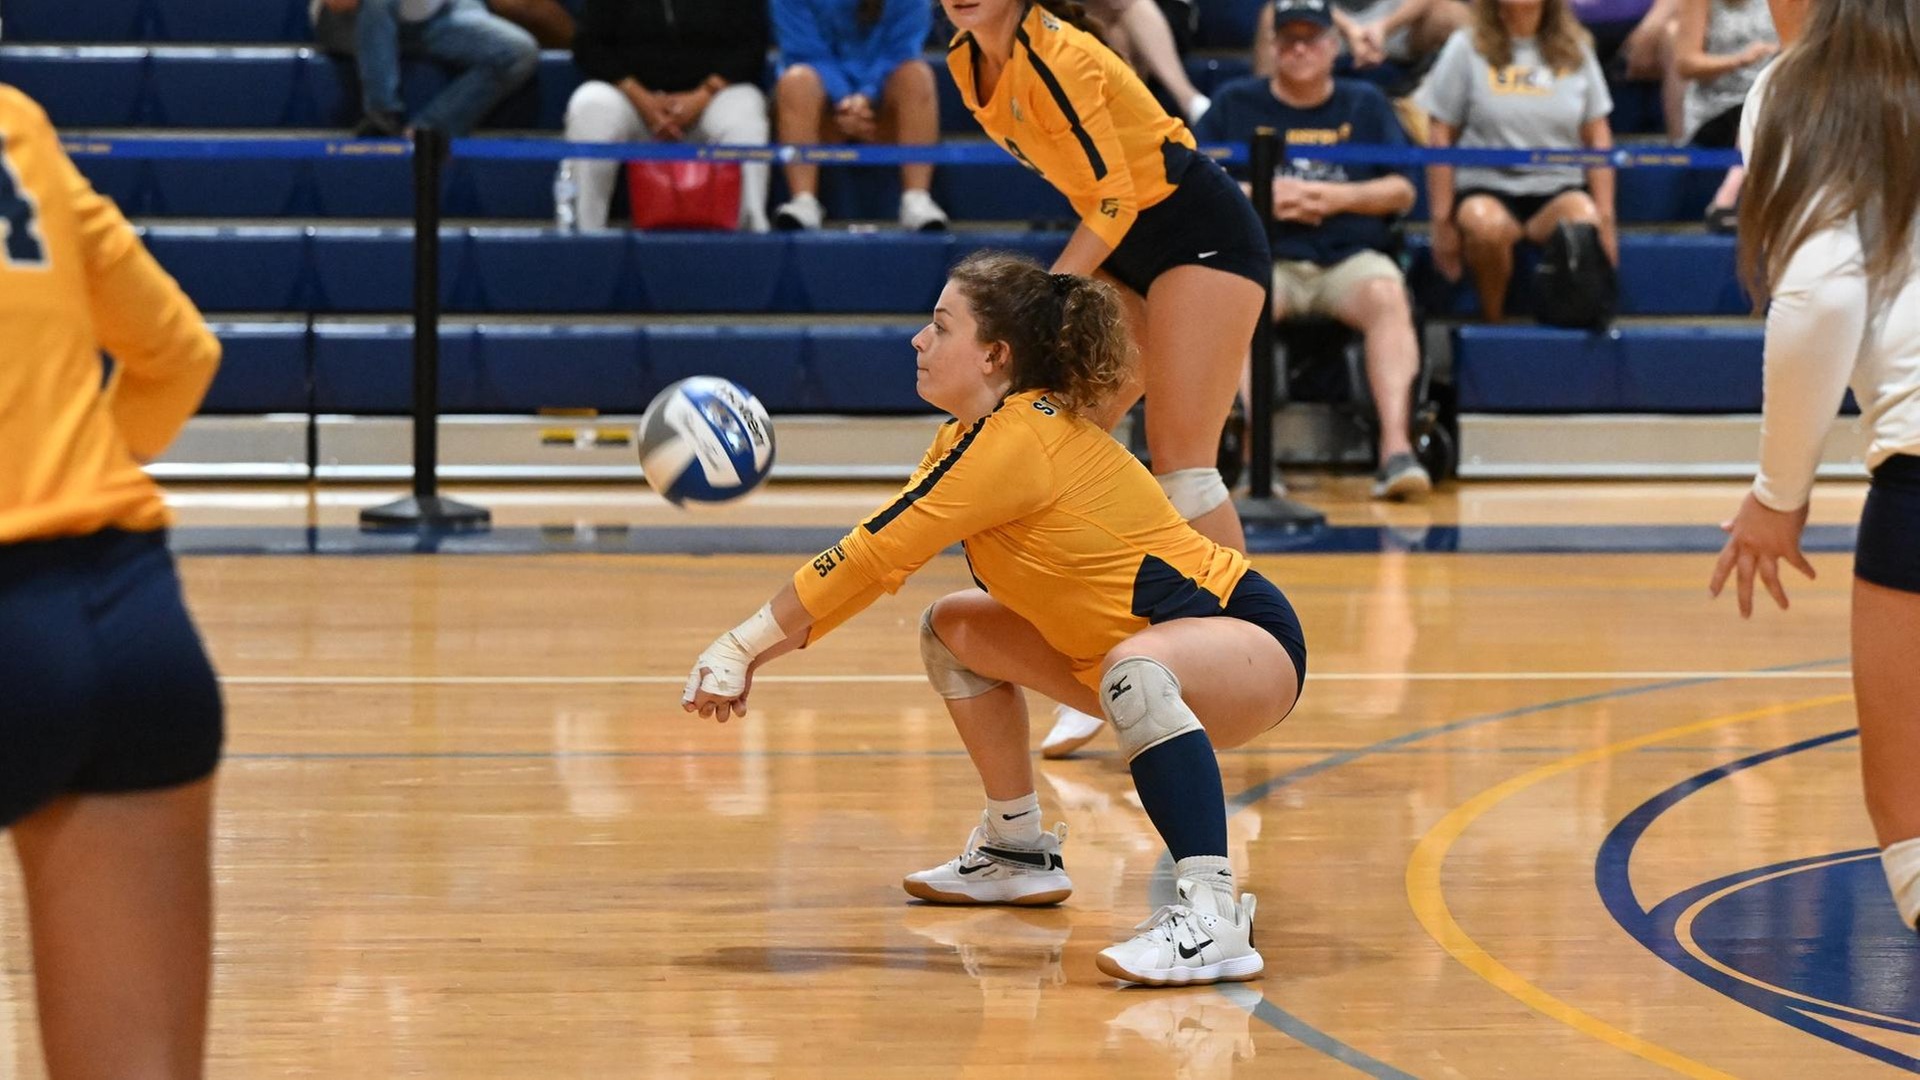 Women's Volleyball Drops Non-Conference Contest to Hunter, 3-1